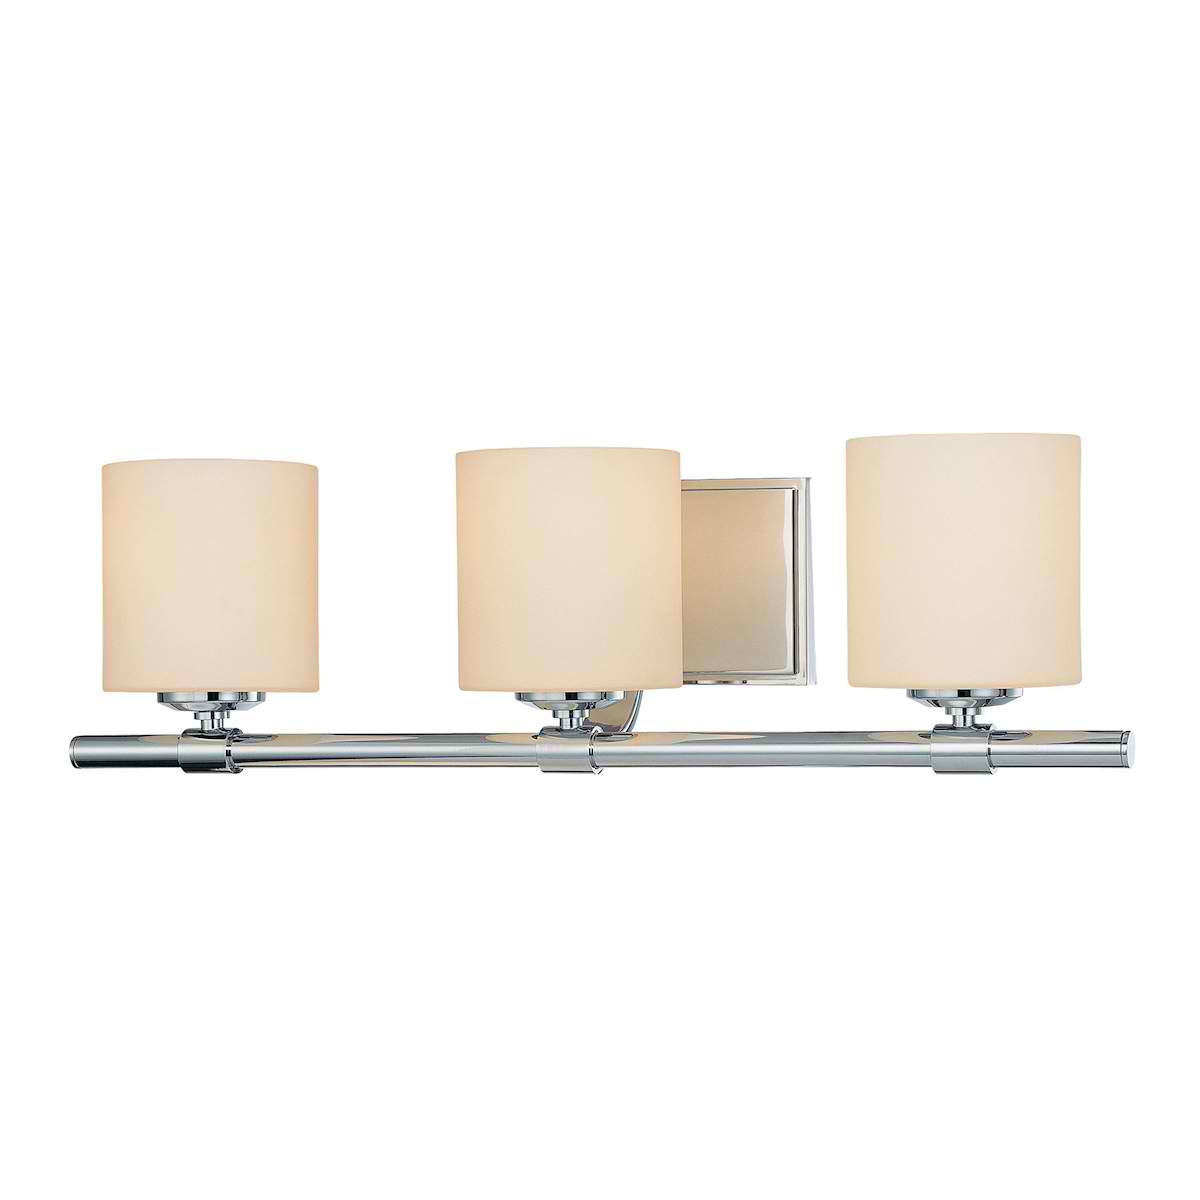 Slide Triple Lamp with Cylinder White Opal Glass / Chrome finish